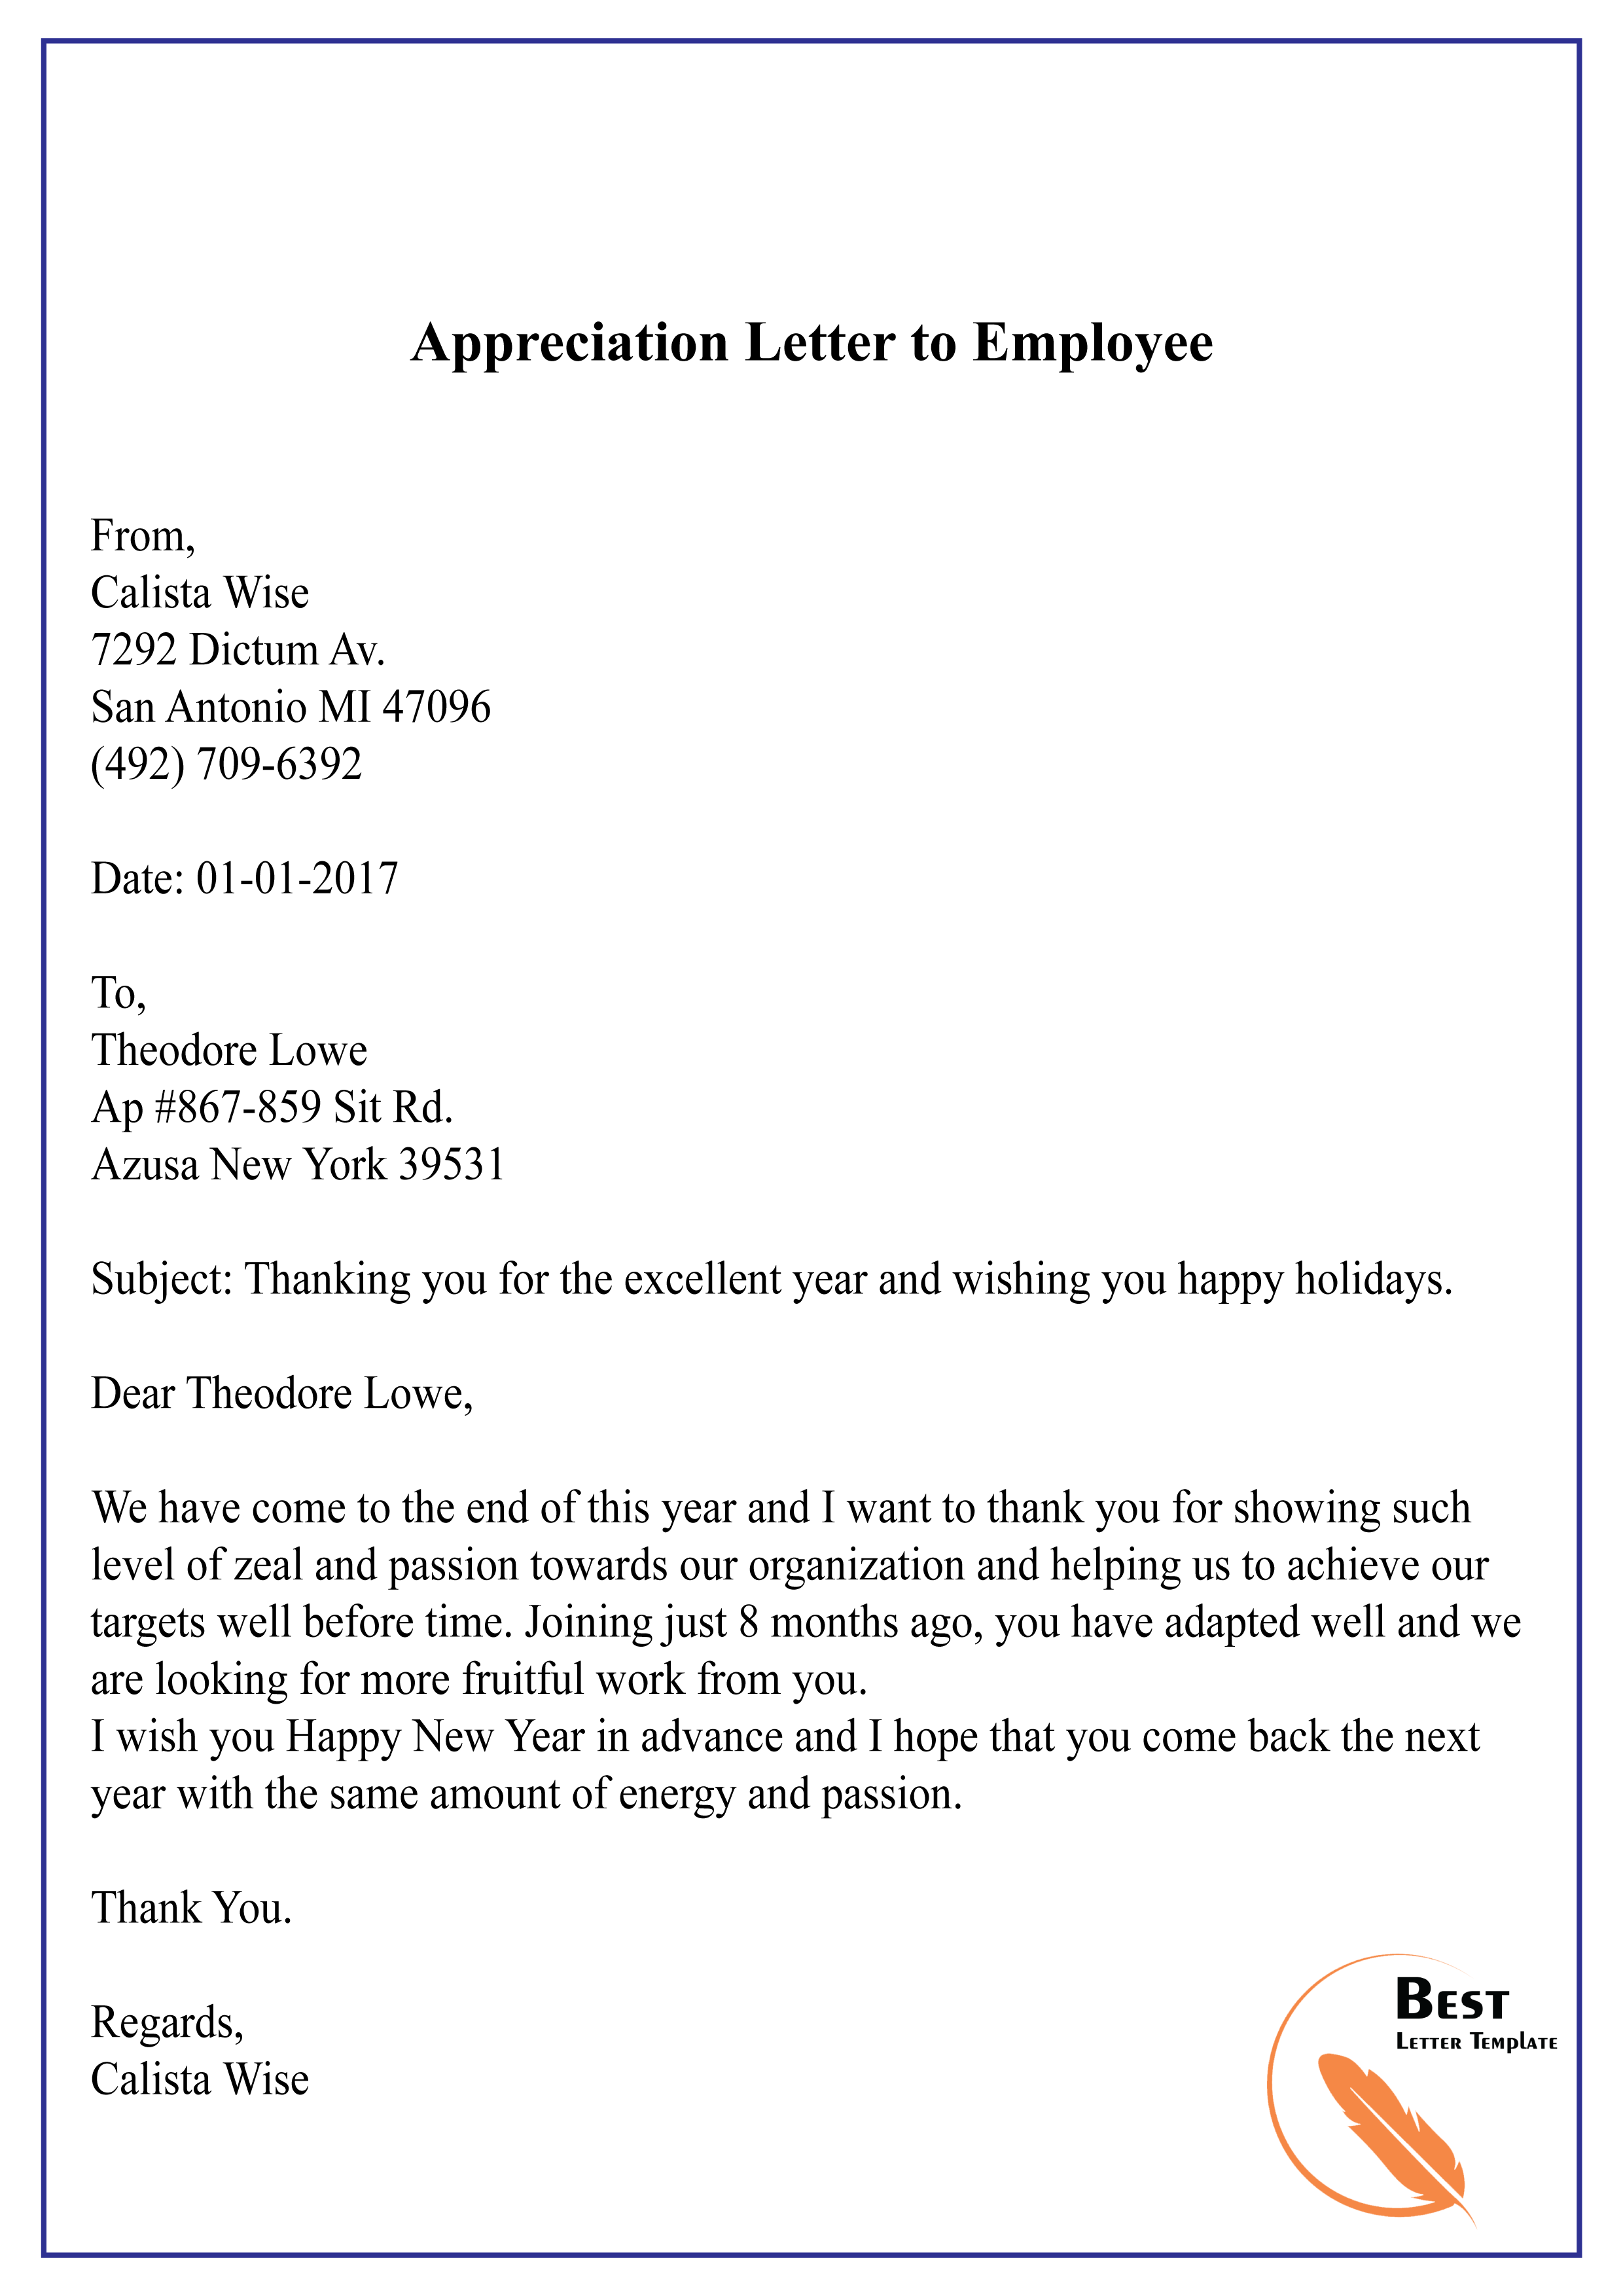 Appreciation Letter to Employee01 Best Letter Template